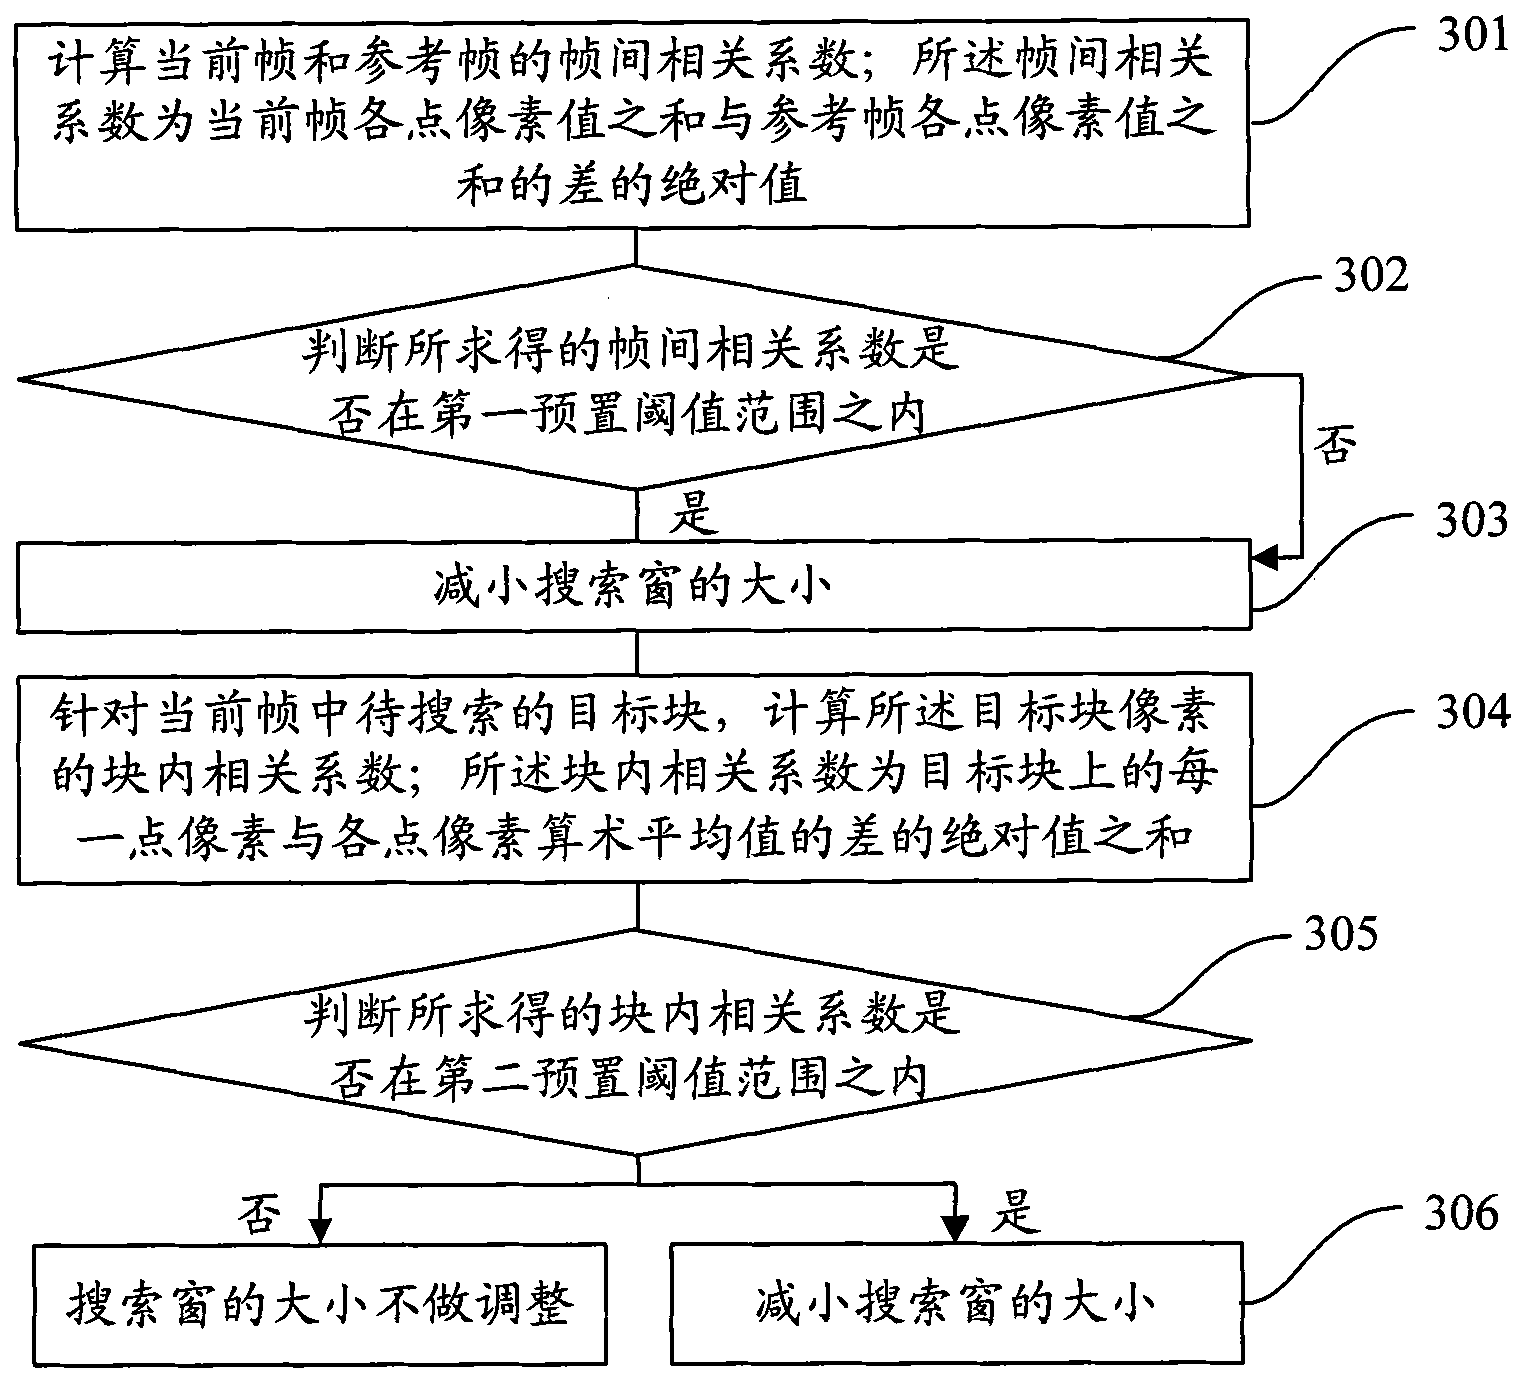 Method and device for dynamically adjusting search window as well as block matching method and device